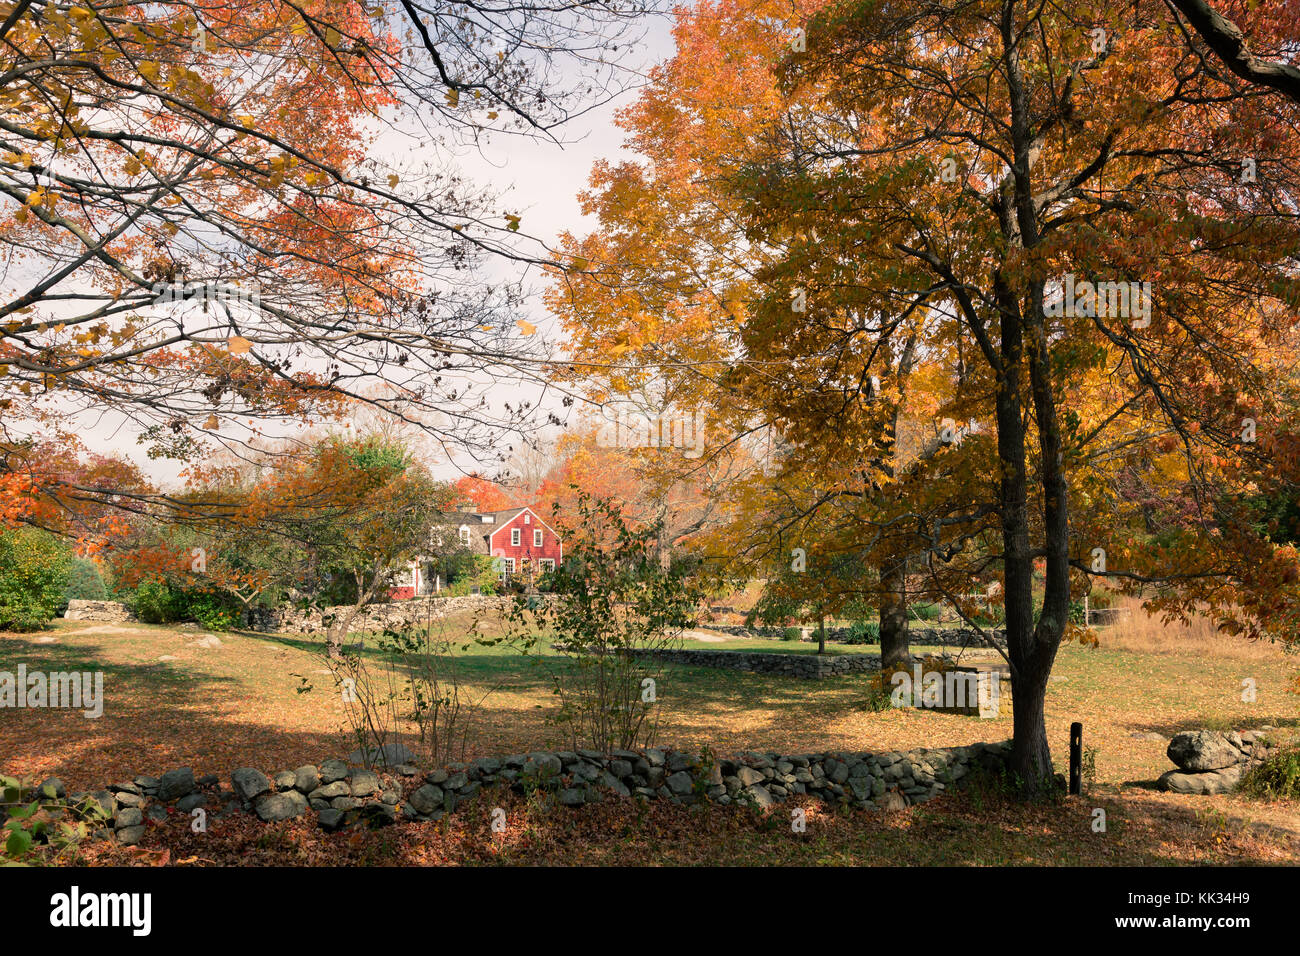 Autumn scene at Weir Farm, a National Historic Site in Wilton, CT. Stock Photo